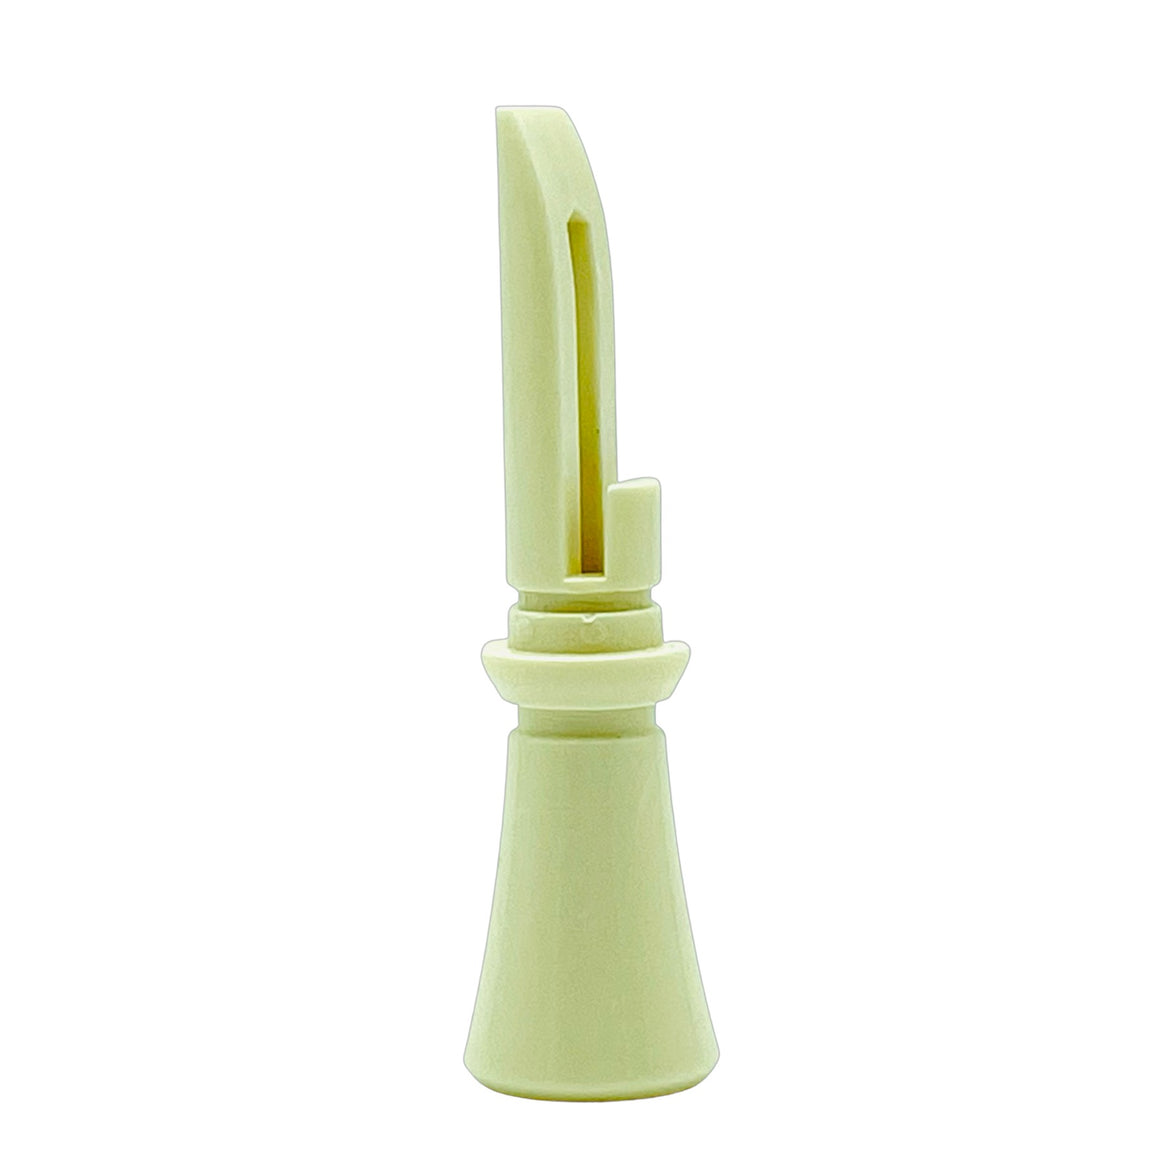 SOLID IVORY POLYCARBONATE DUCK CALL INSERT